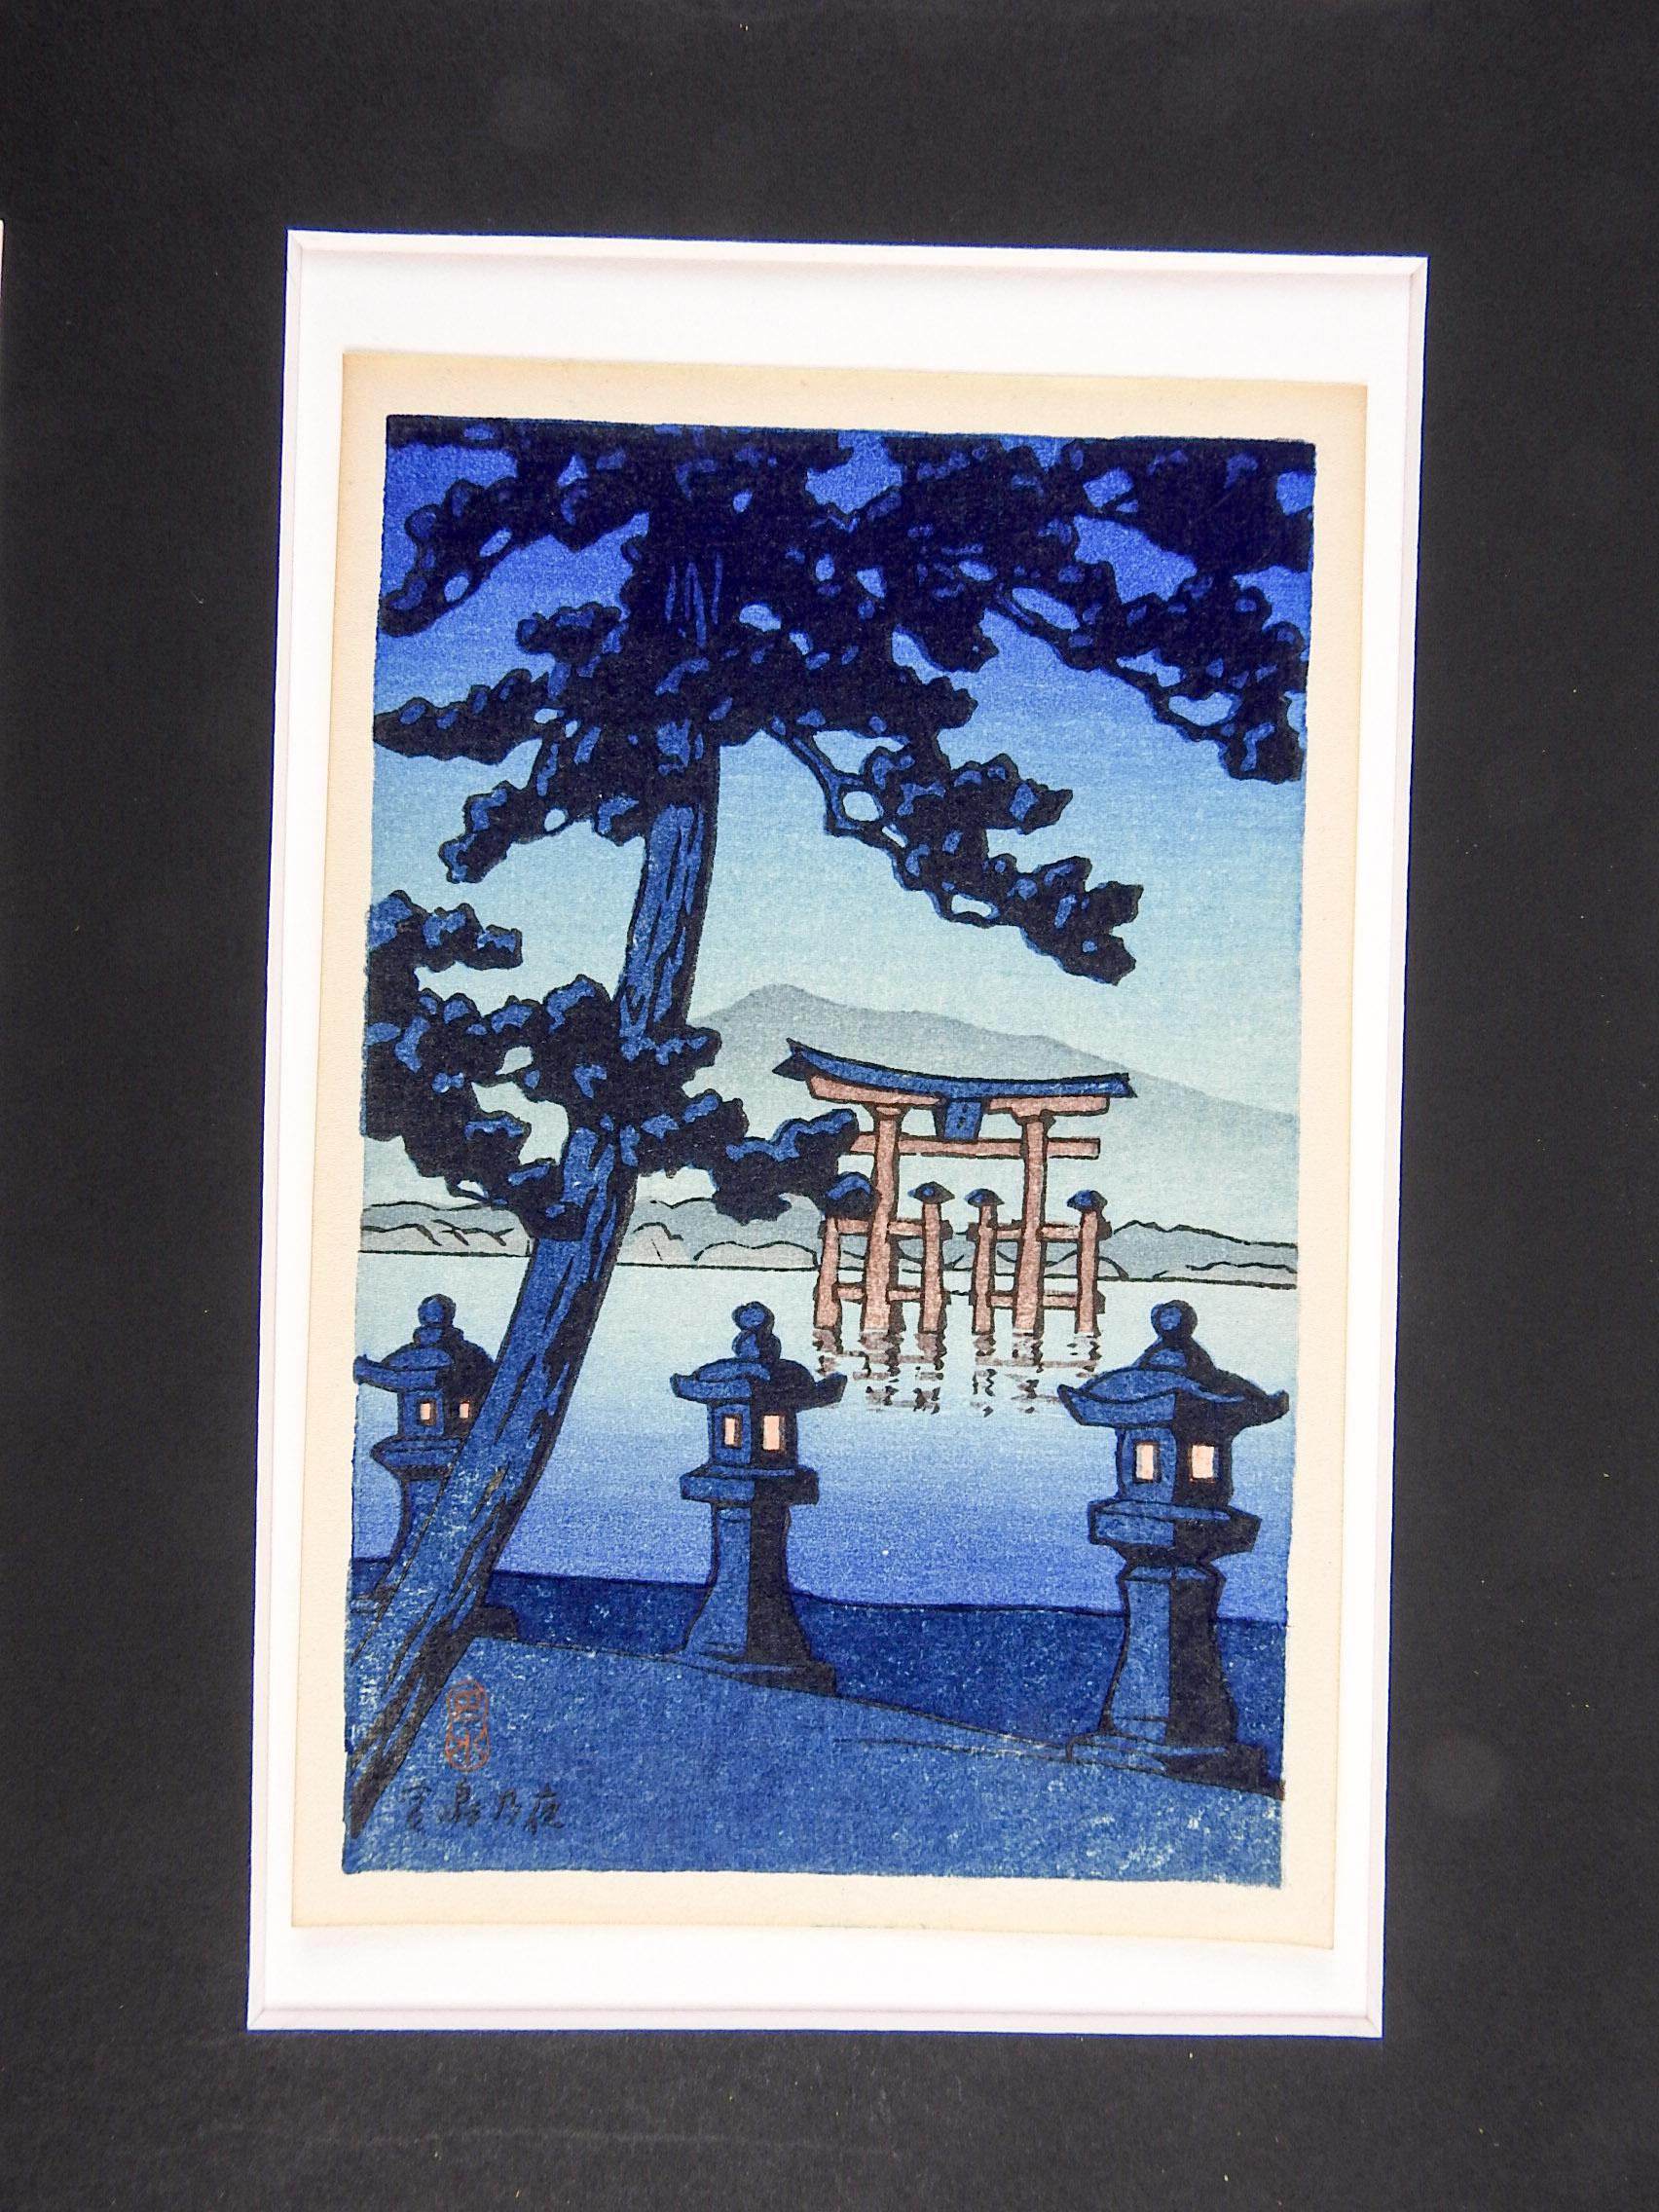 1950s Miniature Japanese Wood Block Prints In Good Condition For Sale In Seguin, TX